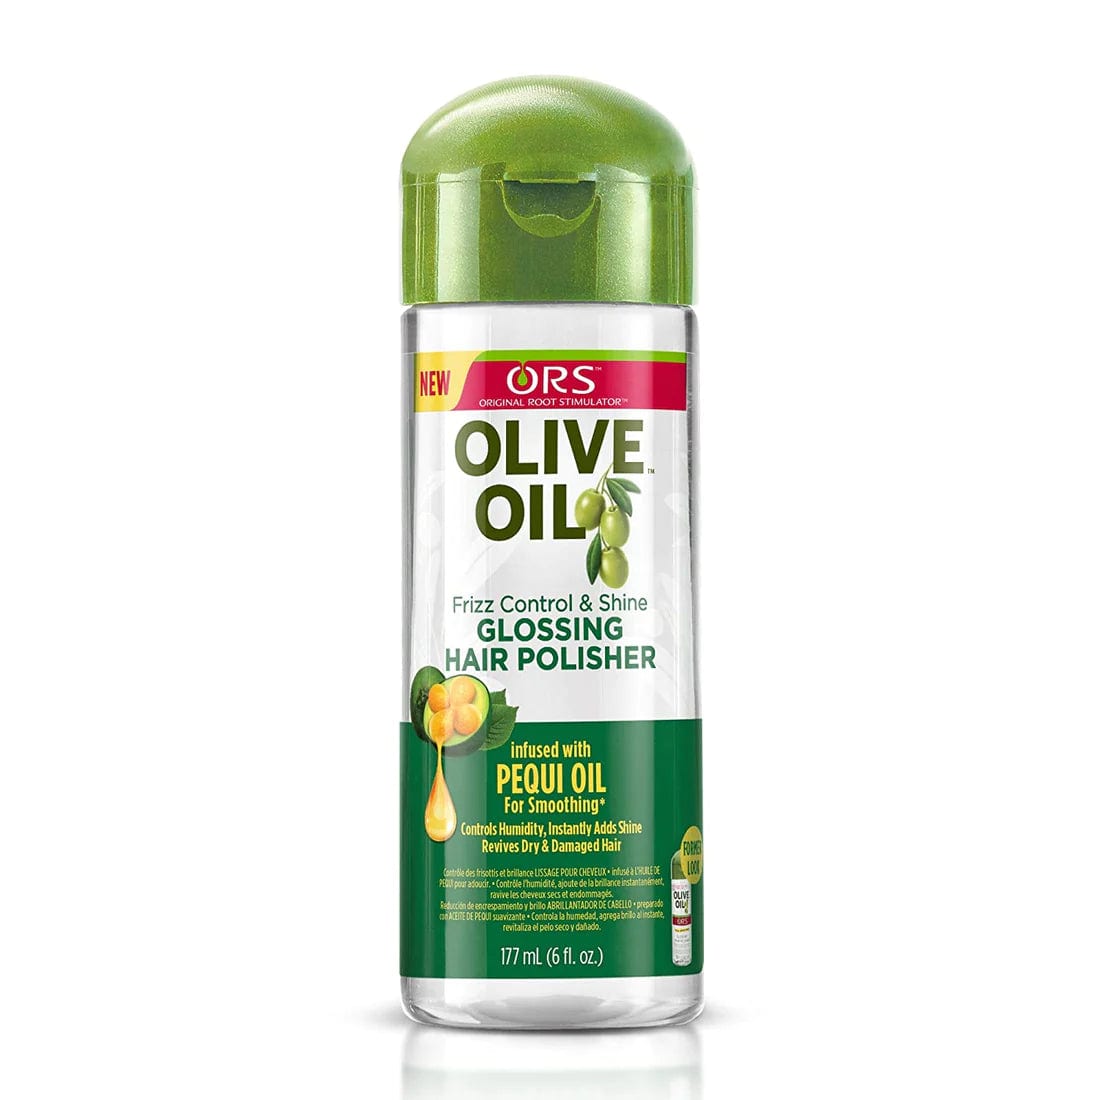 ORS Olive Oil Glossing Hair Polisher 6 OZ